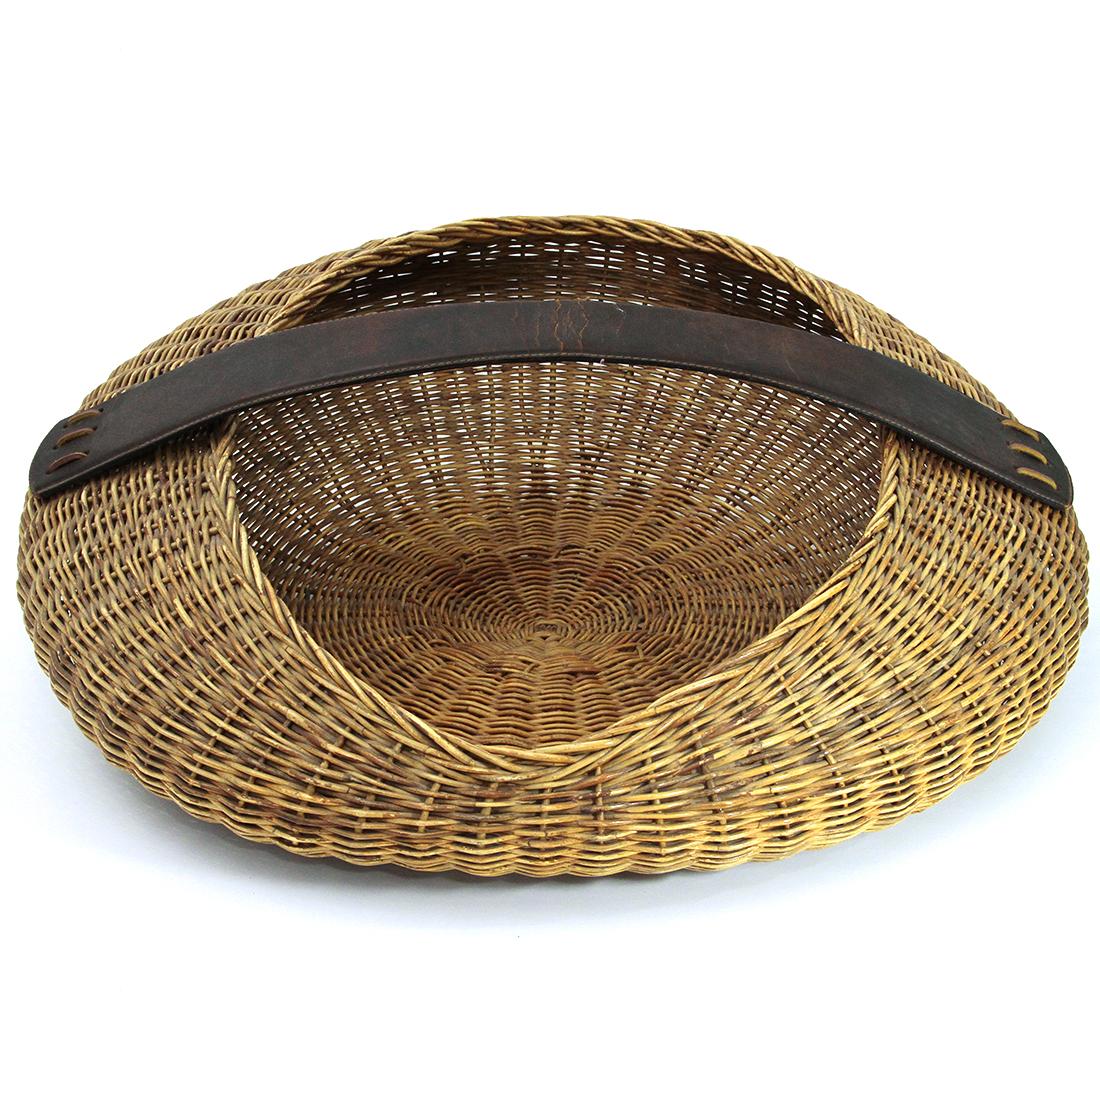 Wicker basket produced in the 1950s by Bonacina on a project by Tito Agnoli.
Circular structure in stuffed rattan with oval opening.
Large leather handle.
Structure in good condition, some signs due to normal use over time.

Dimensions: